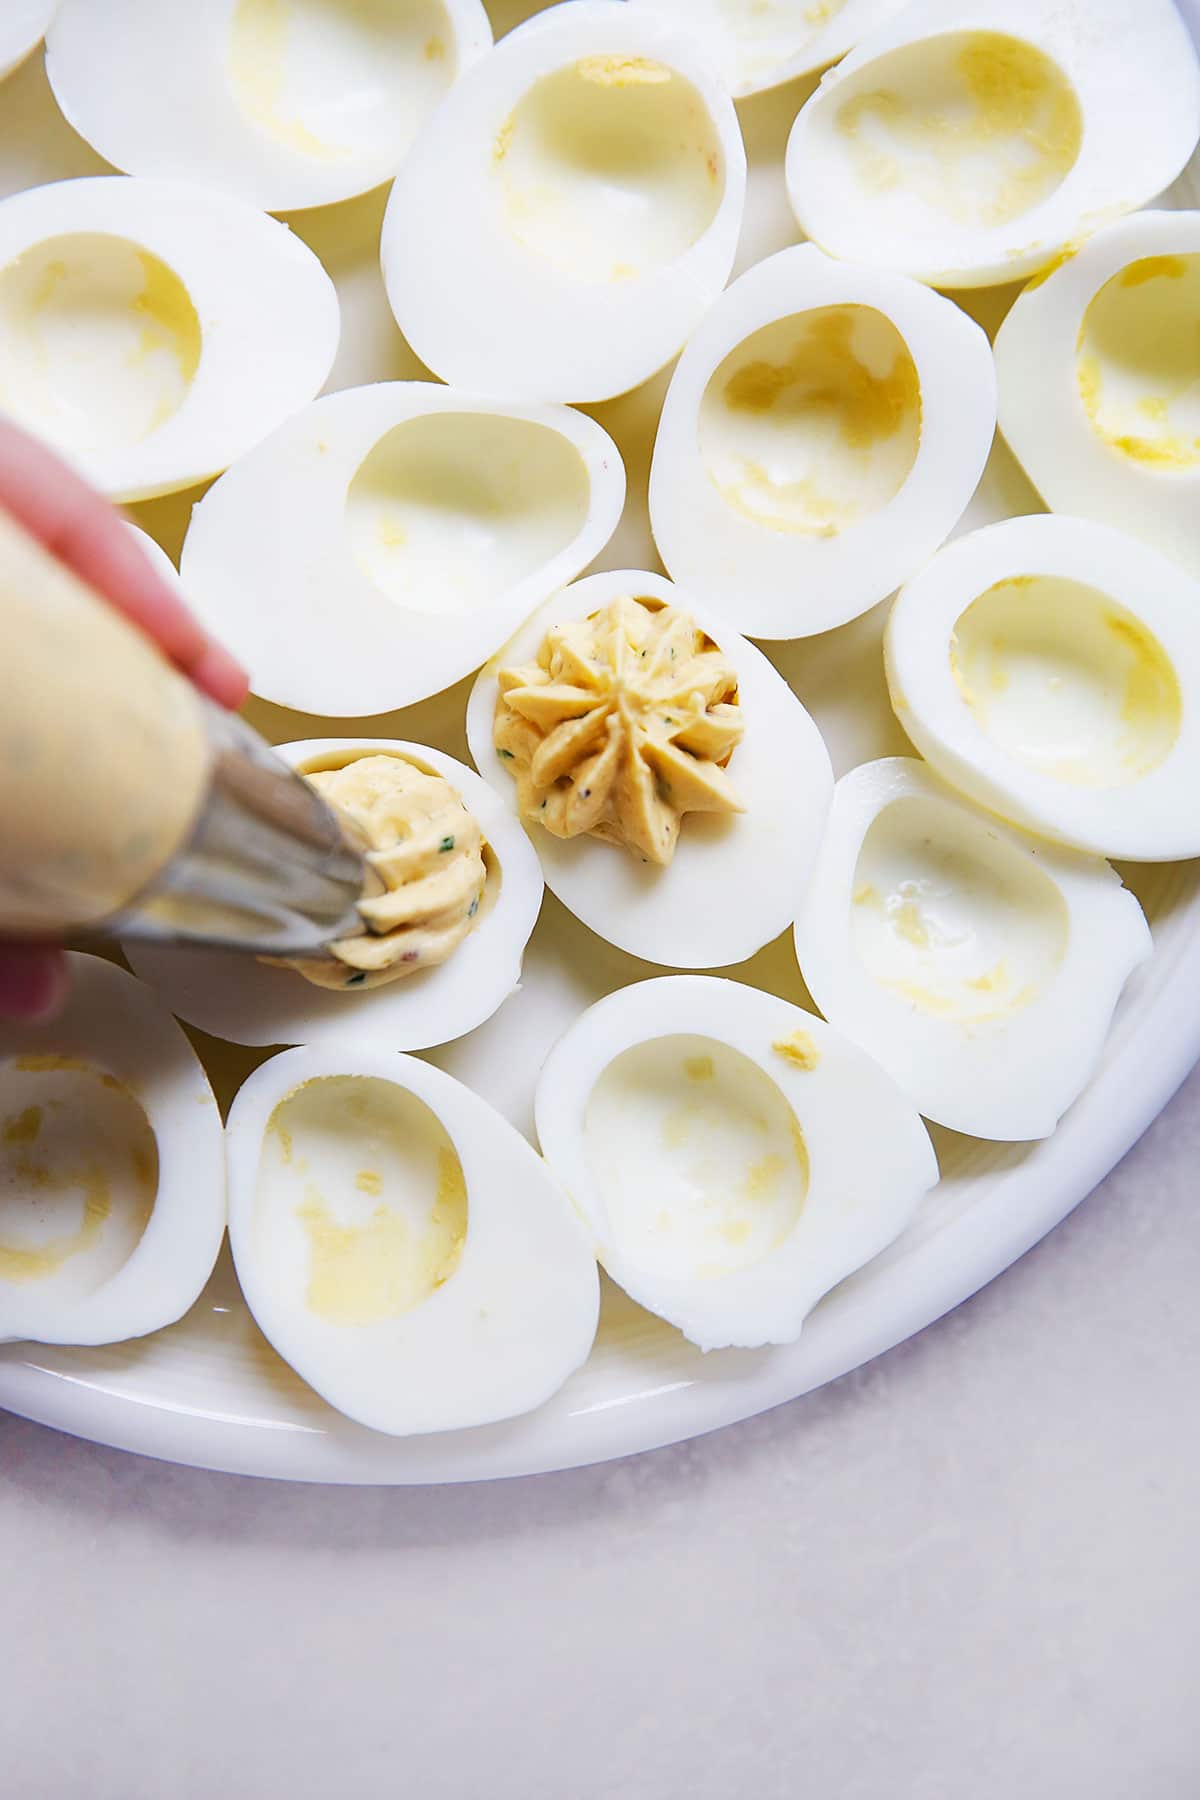 Piping deviled eggs